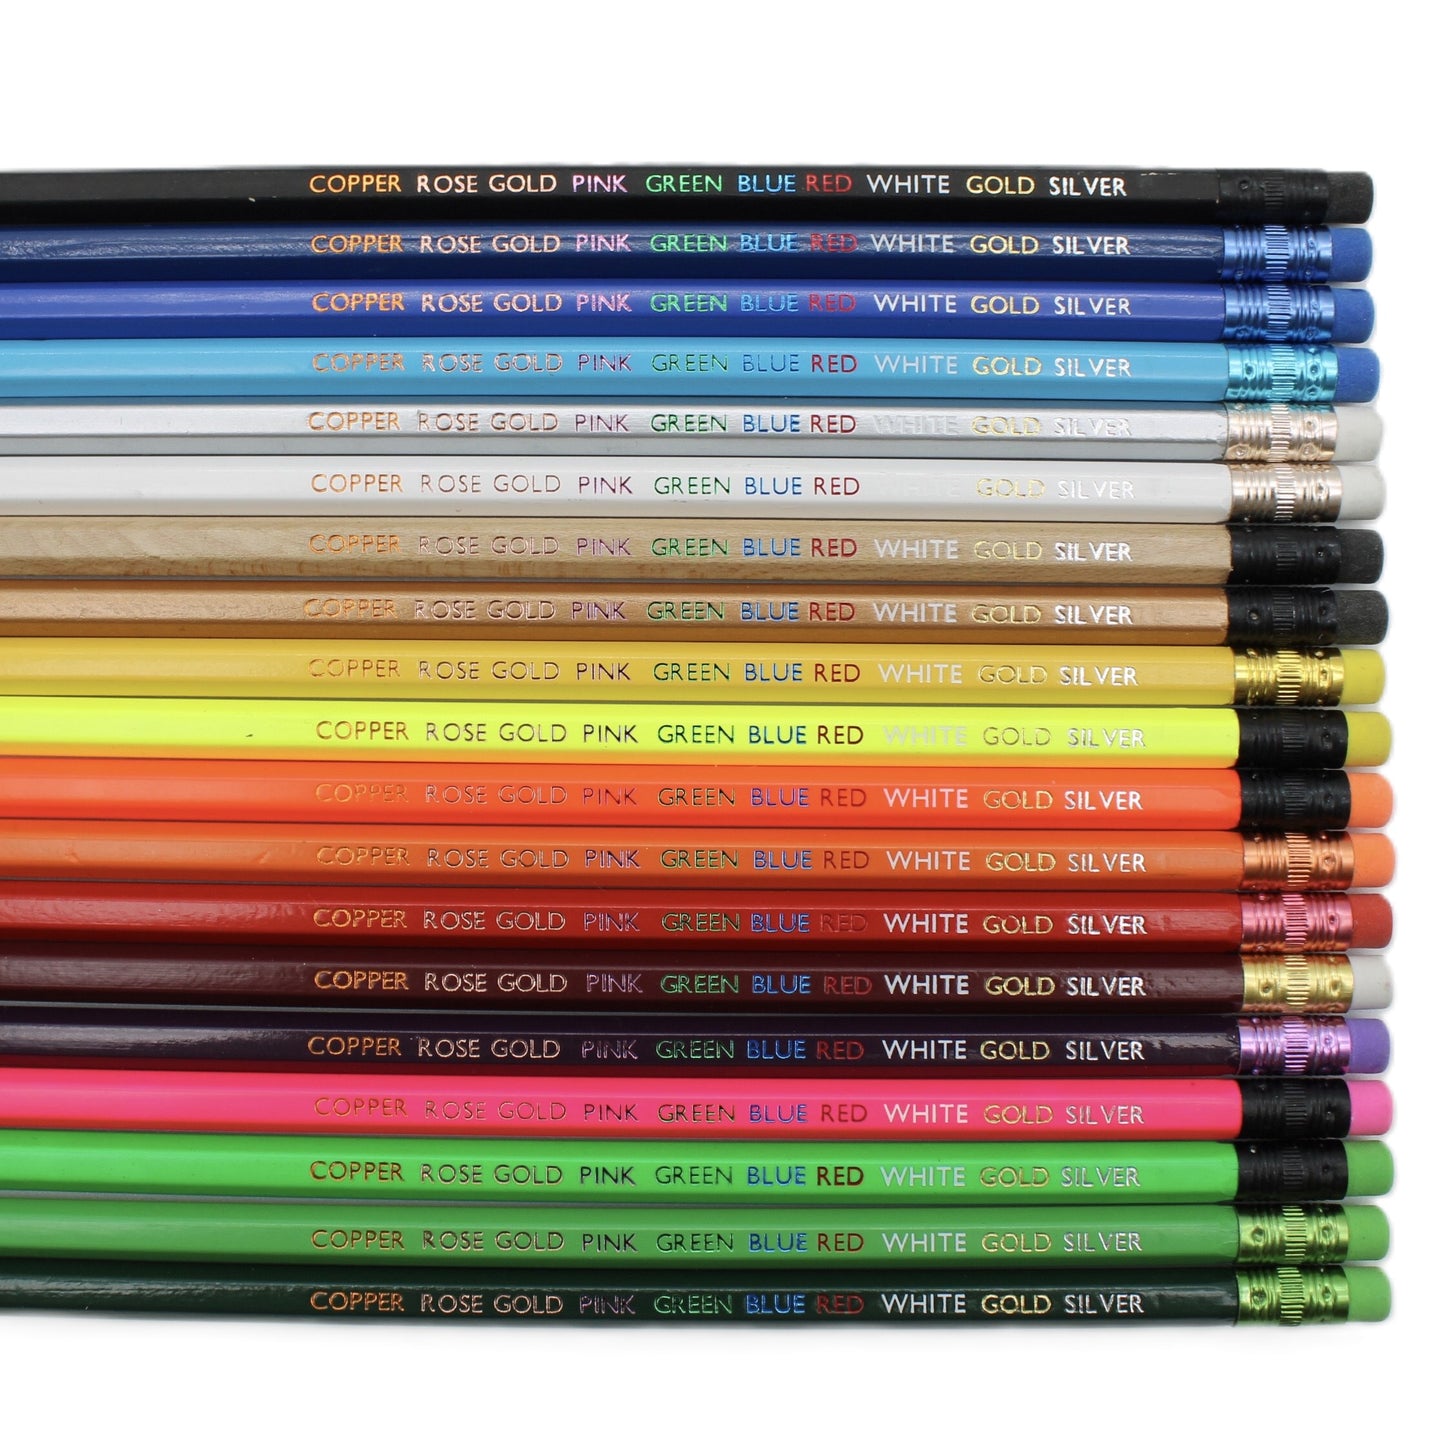 Printed Pencil - Not Your Pencil